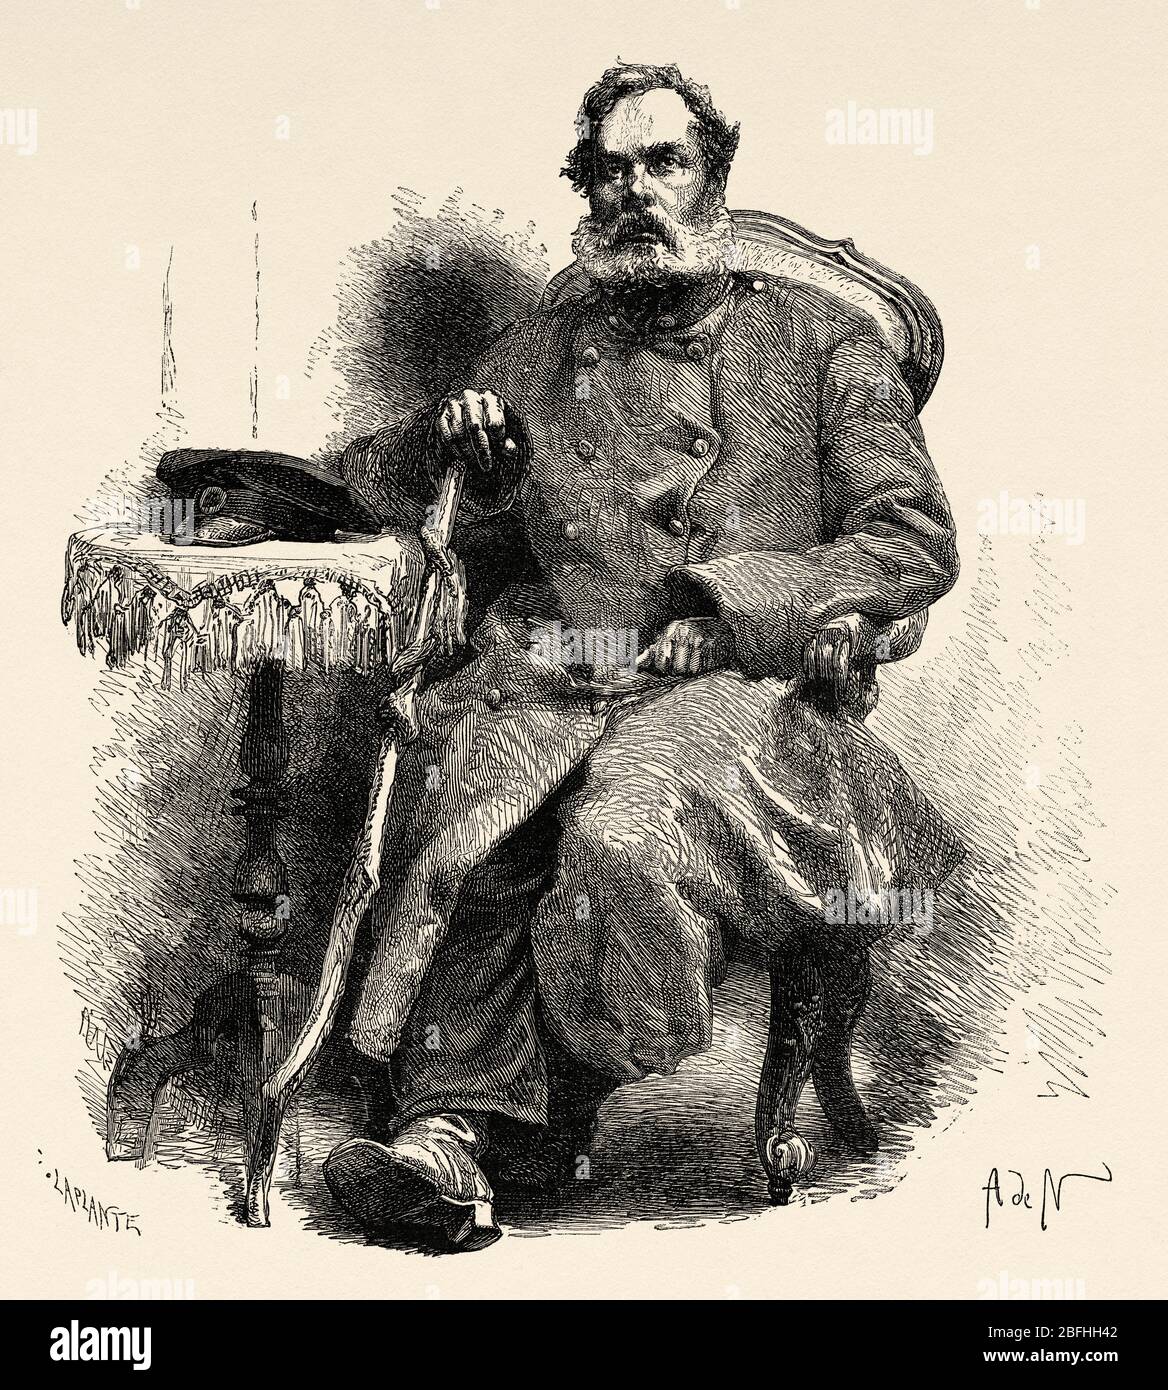 The mysterious prisoner Solovetsky, Nicolas Ilyin, Russia. Old engraving illustration, Travel to Free Russia 1869 by William Hepworth Dixon Stock Photo